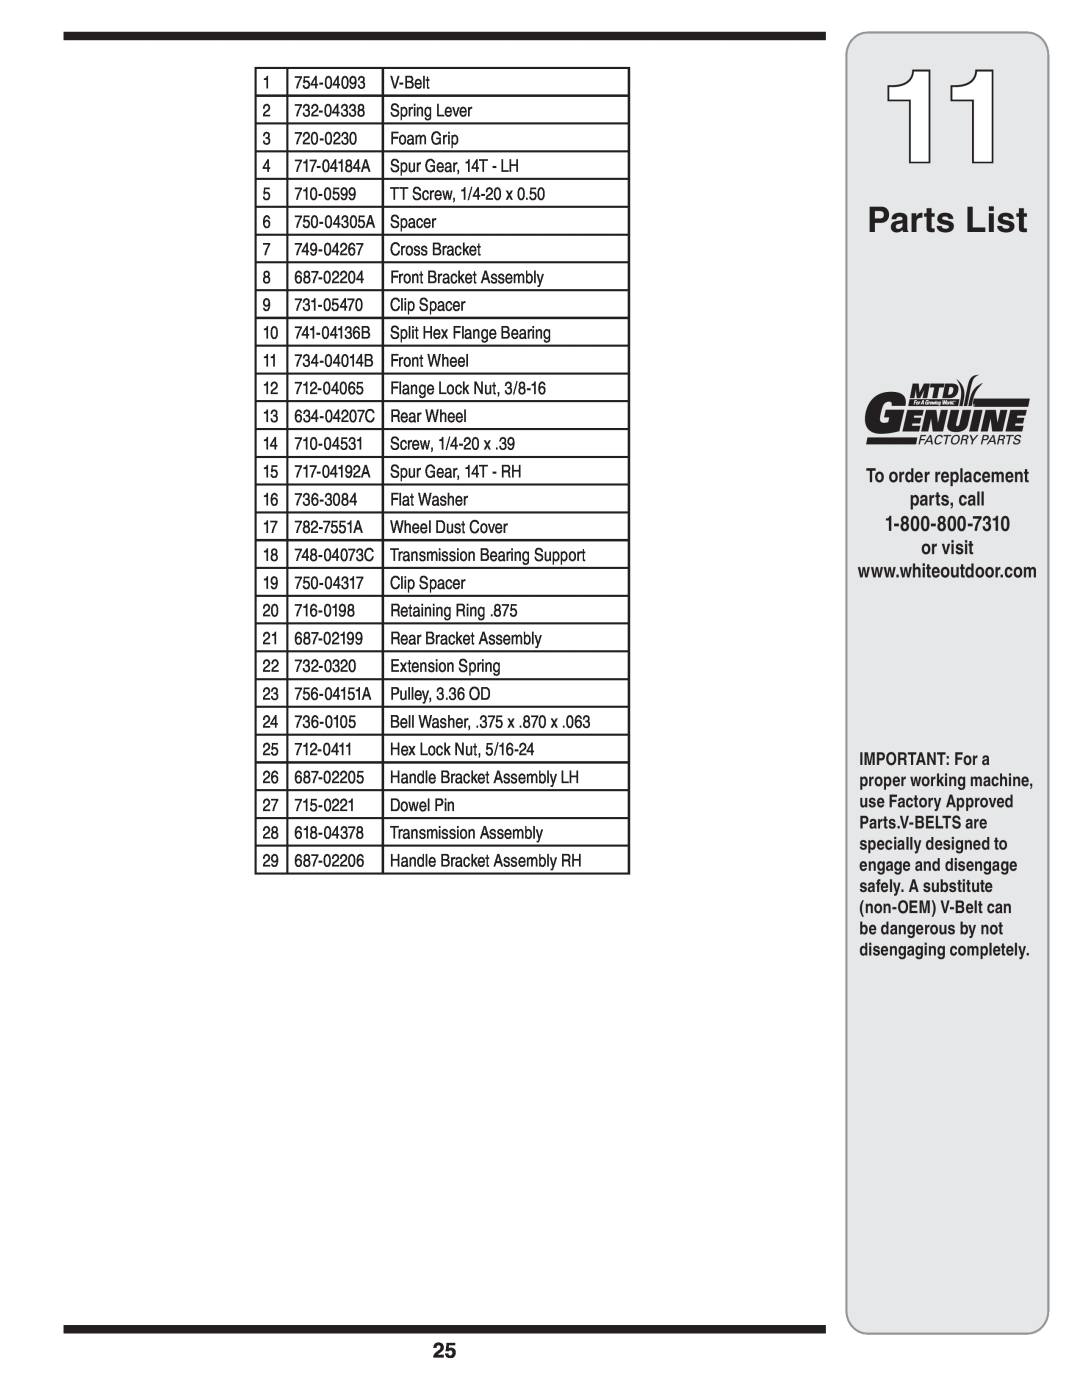 White Outdoor 83M warranty Parts List, To order replacement parts, call, or visit 